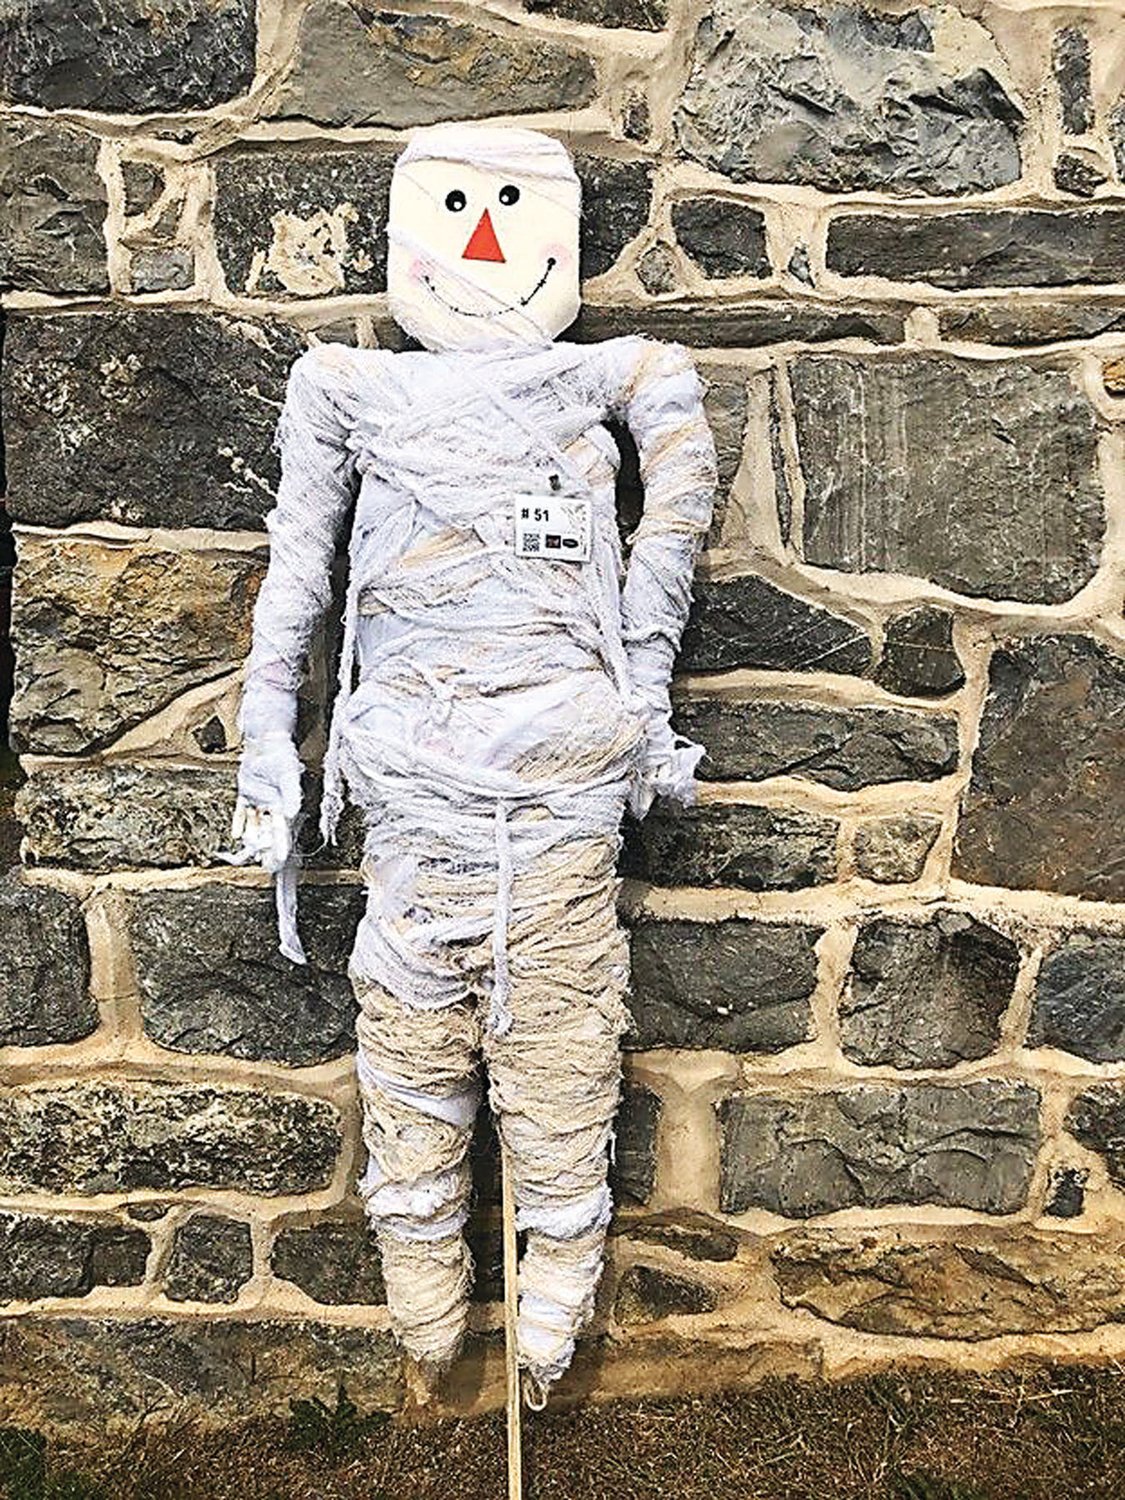 A mummy scarecrow was among last year’s entries in the Scarecrow Showdown in Bethlehem.